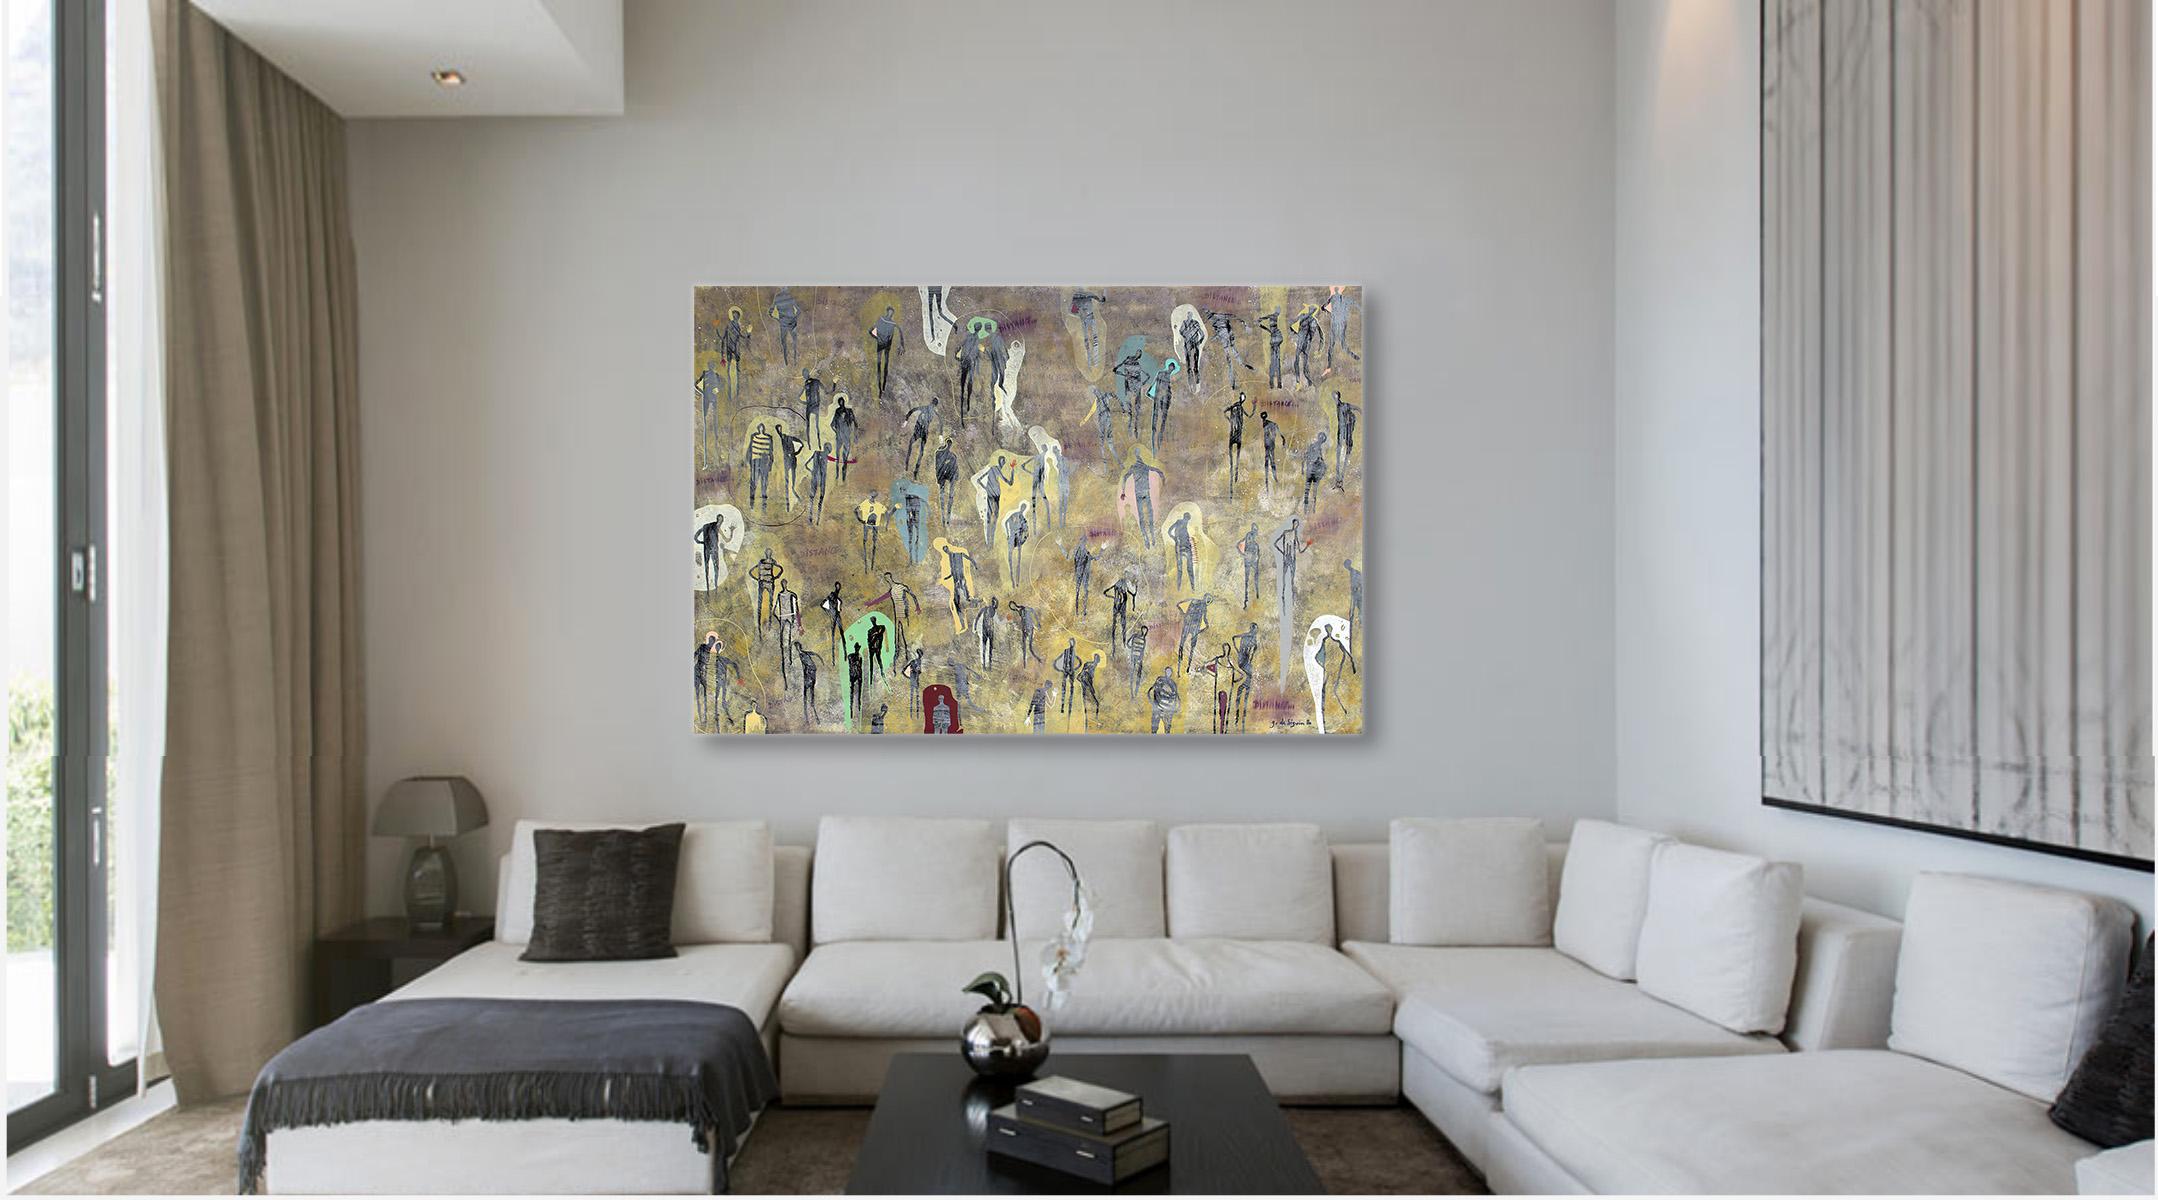 Proximity and Distance by Gaetan de Seguin Contemporary large abstract painting 1